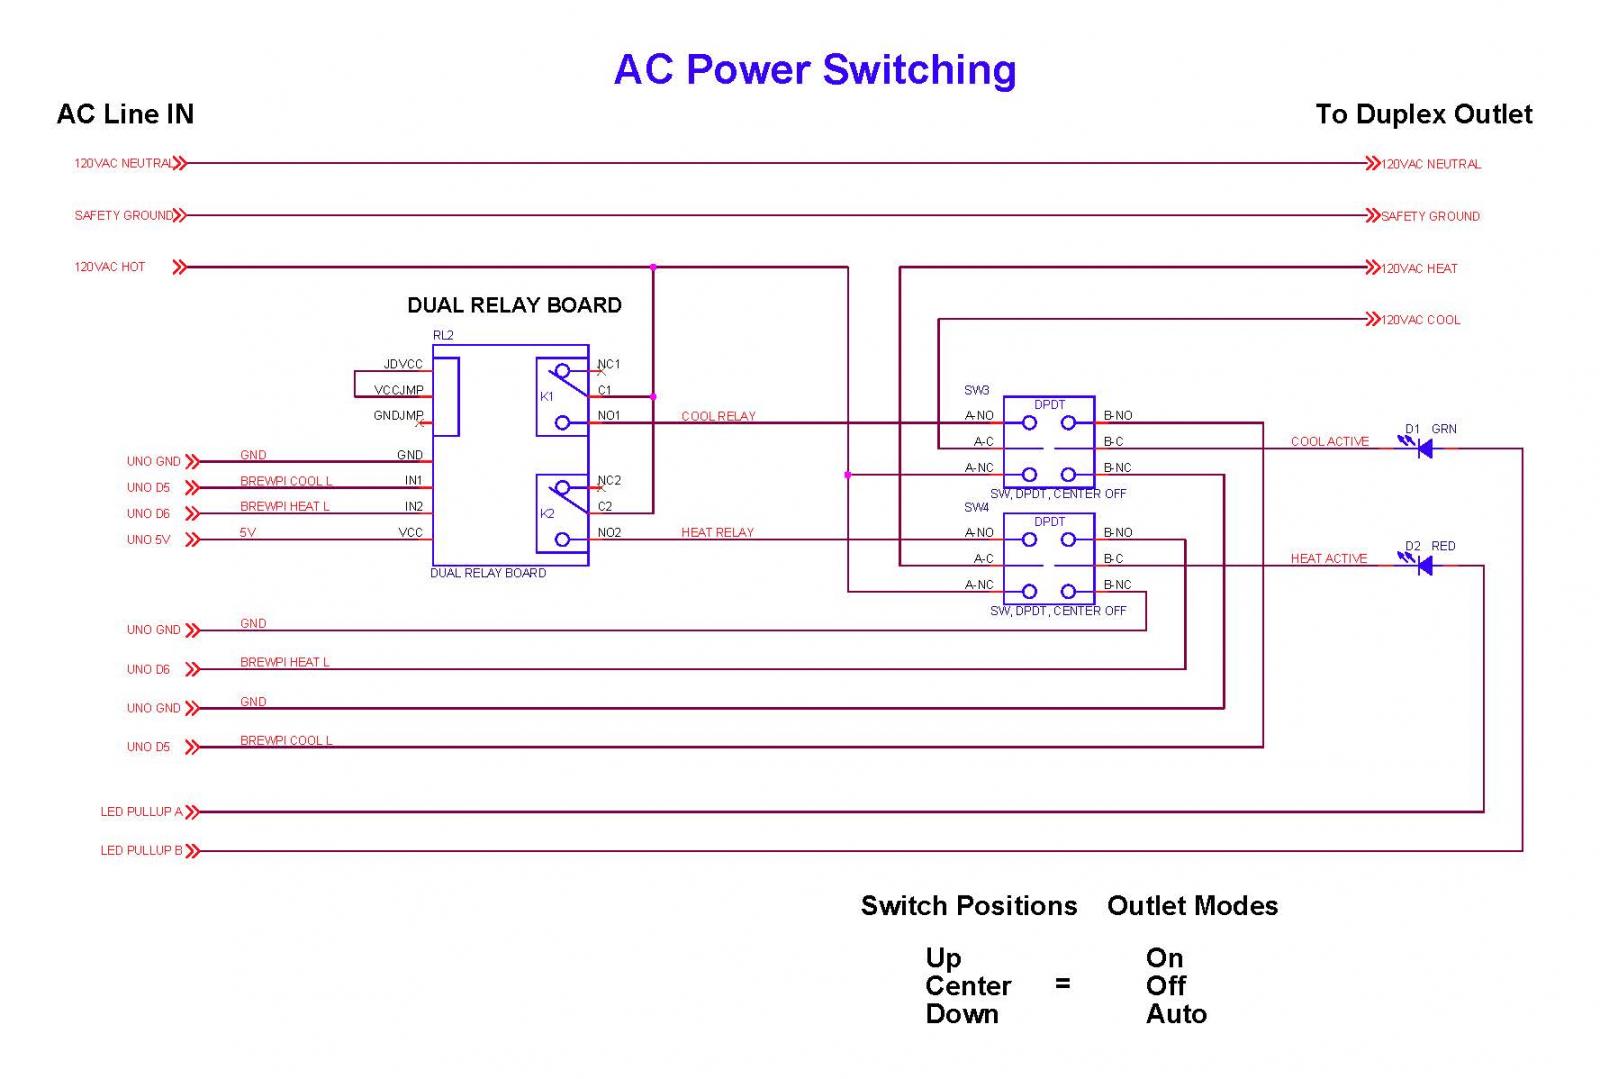 ac_power_switching_page_01-jpg.258926